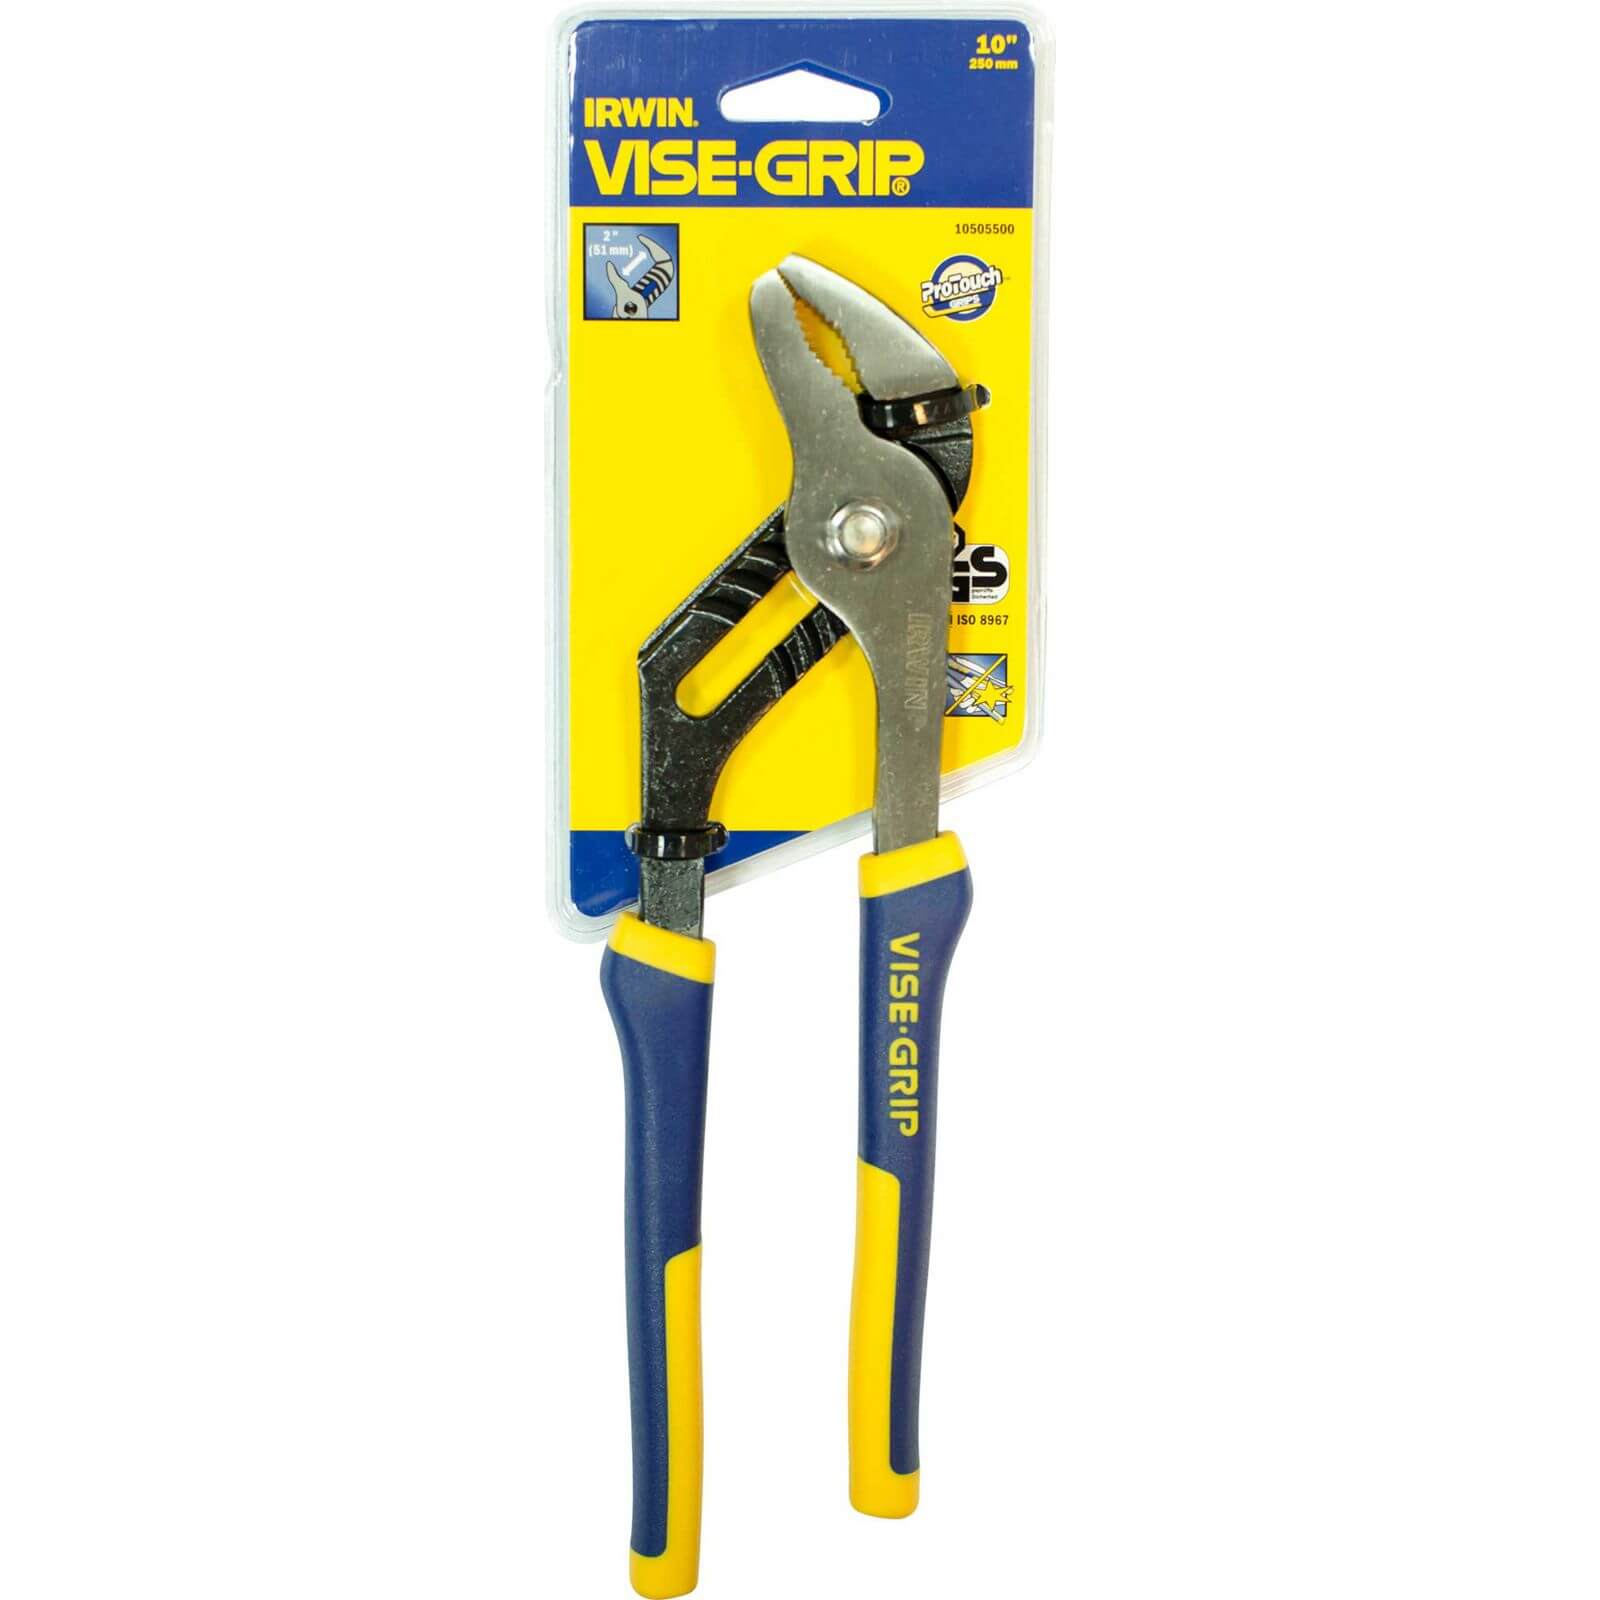 Irwin Vise-Grip Groove Joint Pliers - 10in